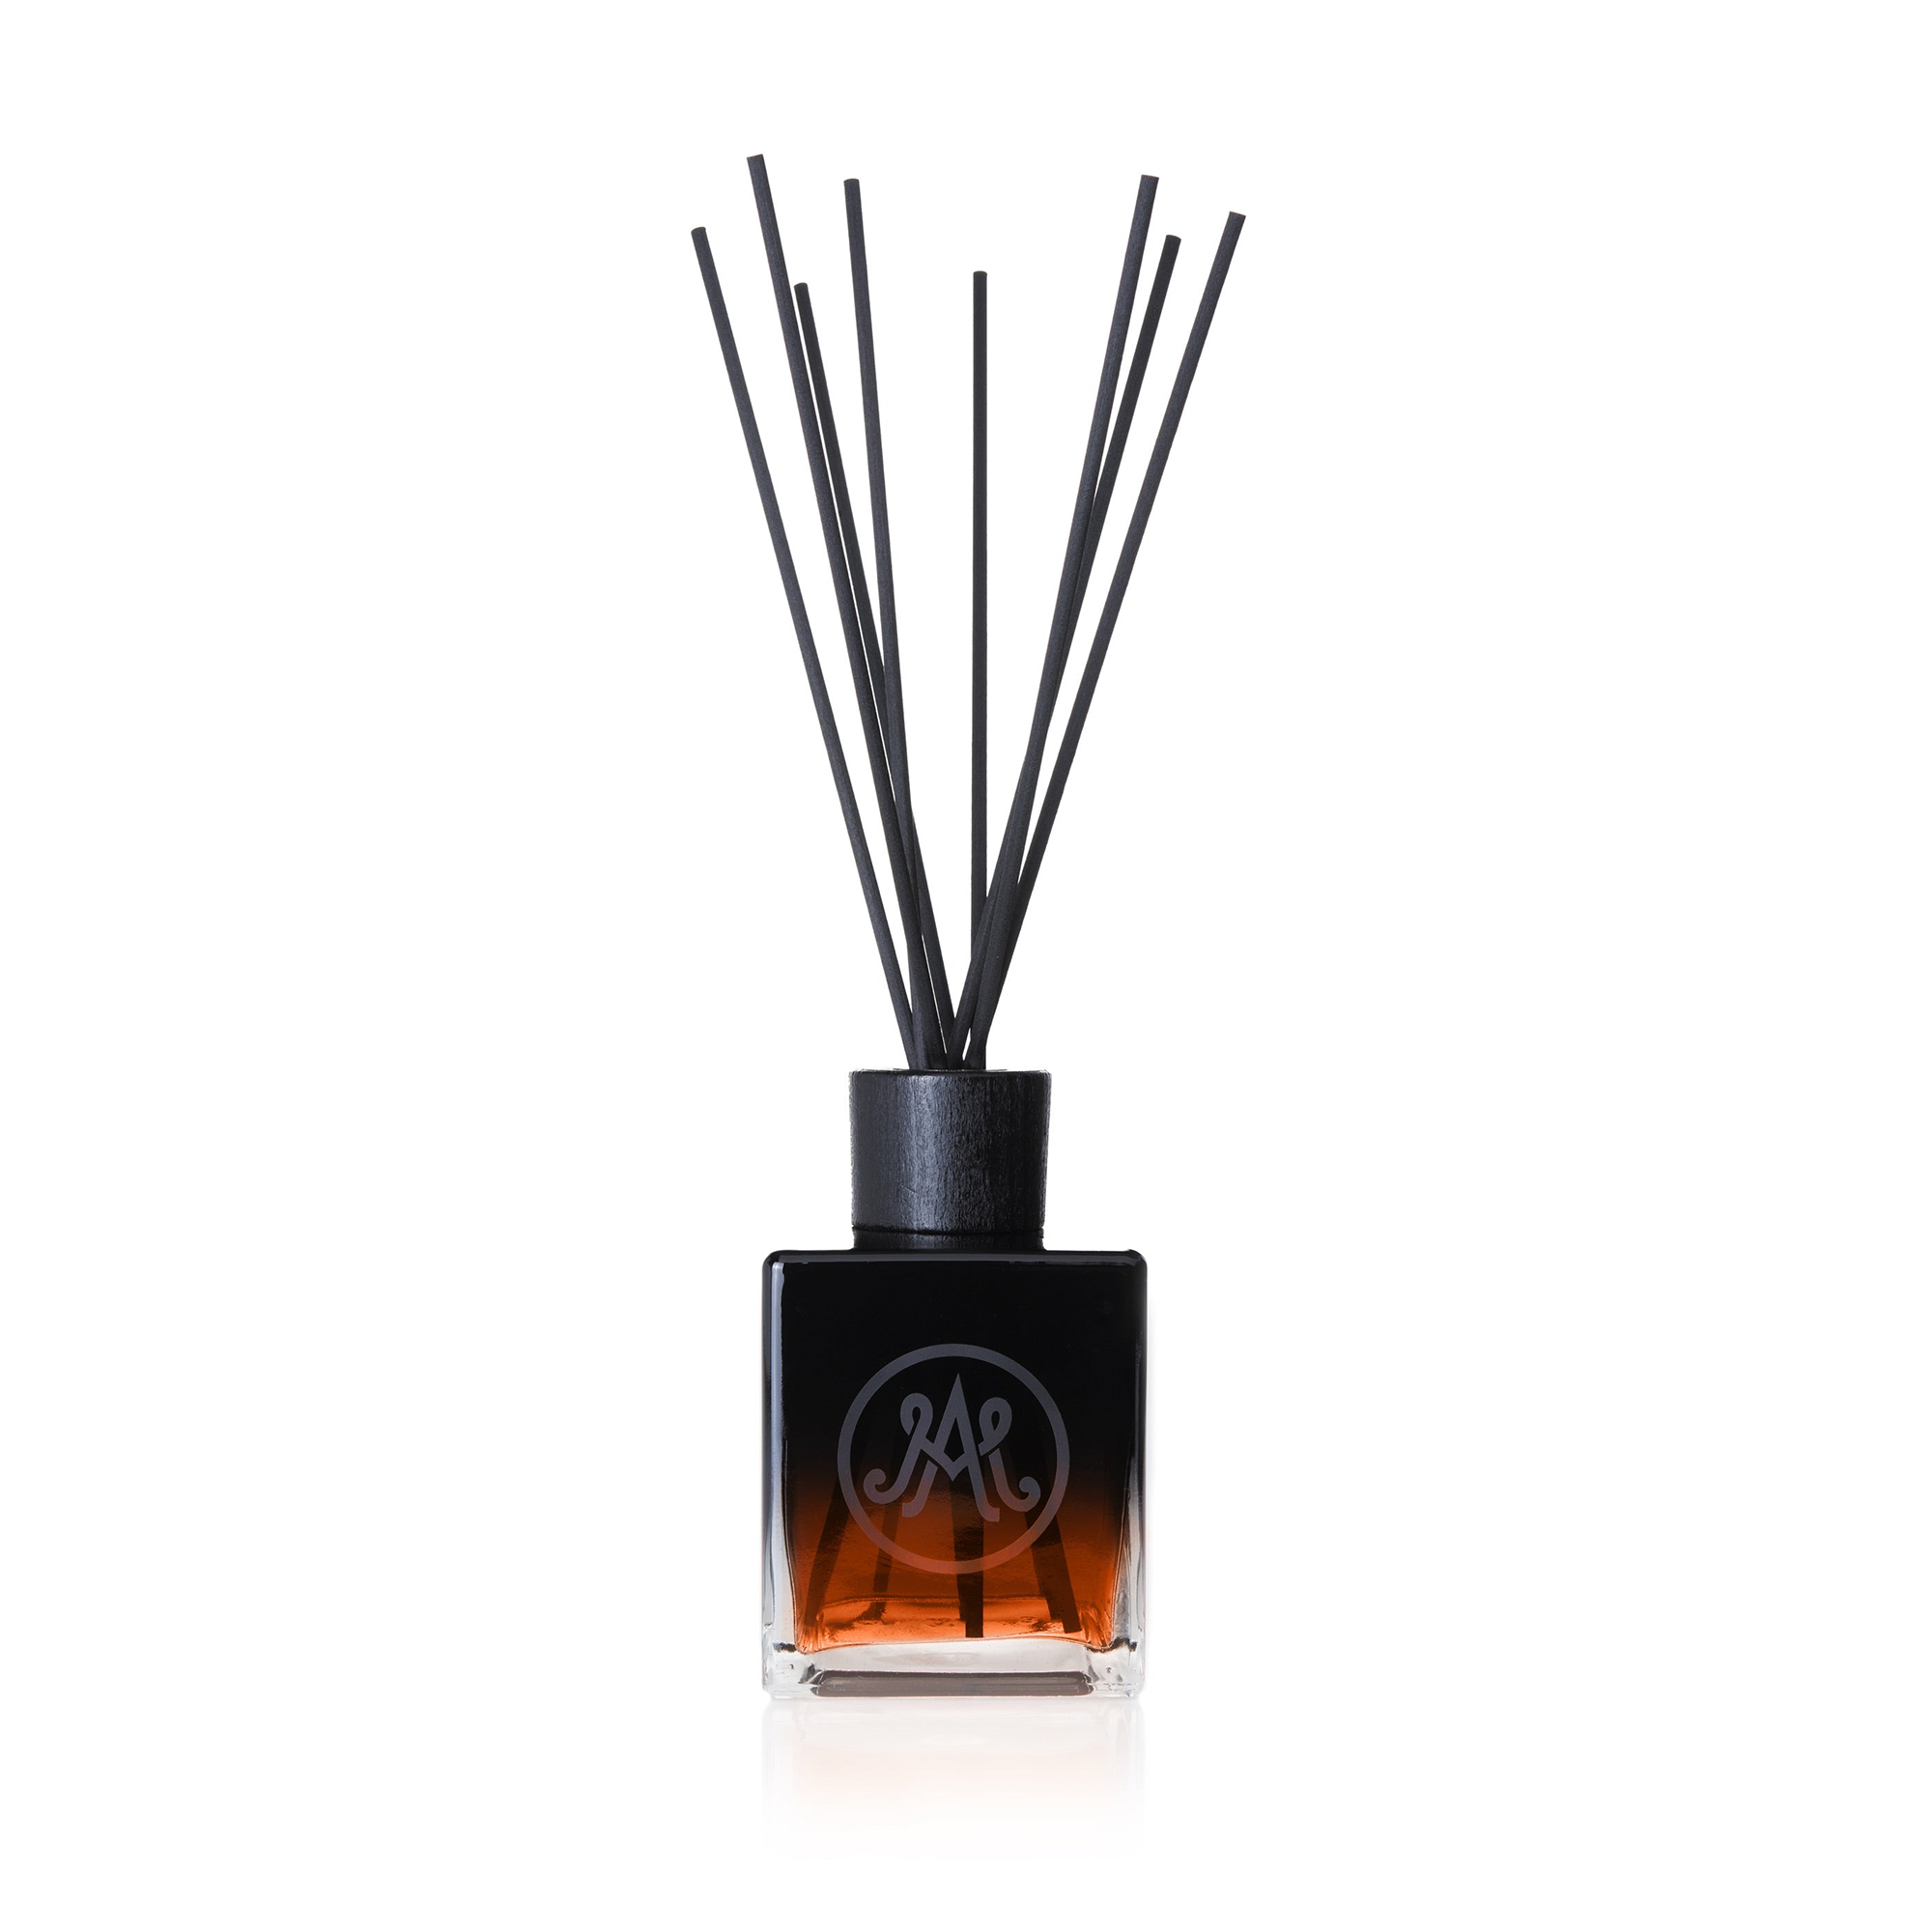 A dark amber diffuser with black reeds is displayed, featuring a sleek black cap and an elegant monogram logo on the front of the bottle. Infused with notes of prunes, apricots, oak, and a touch of Armagnac, this exceptional fruity and spicy fragrance is perfect for both men and women.